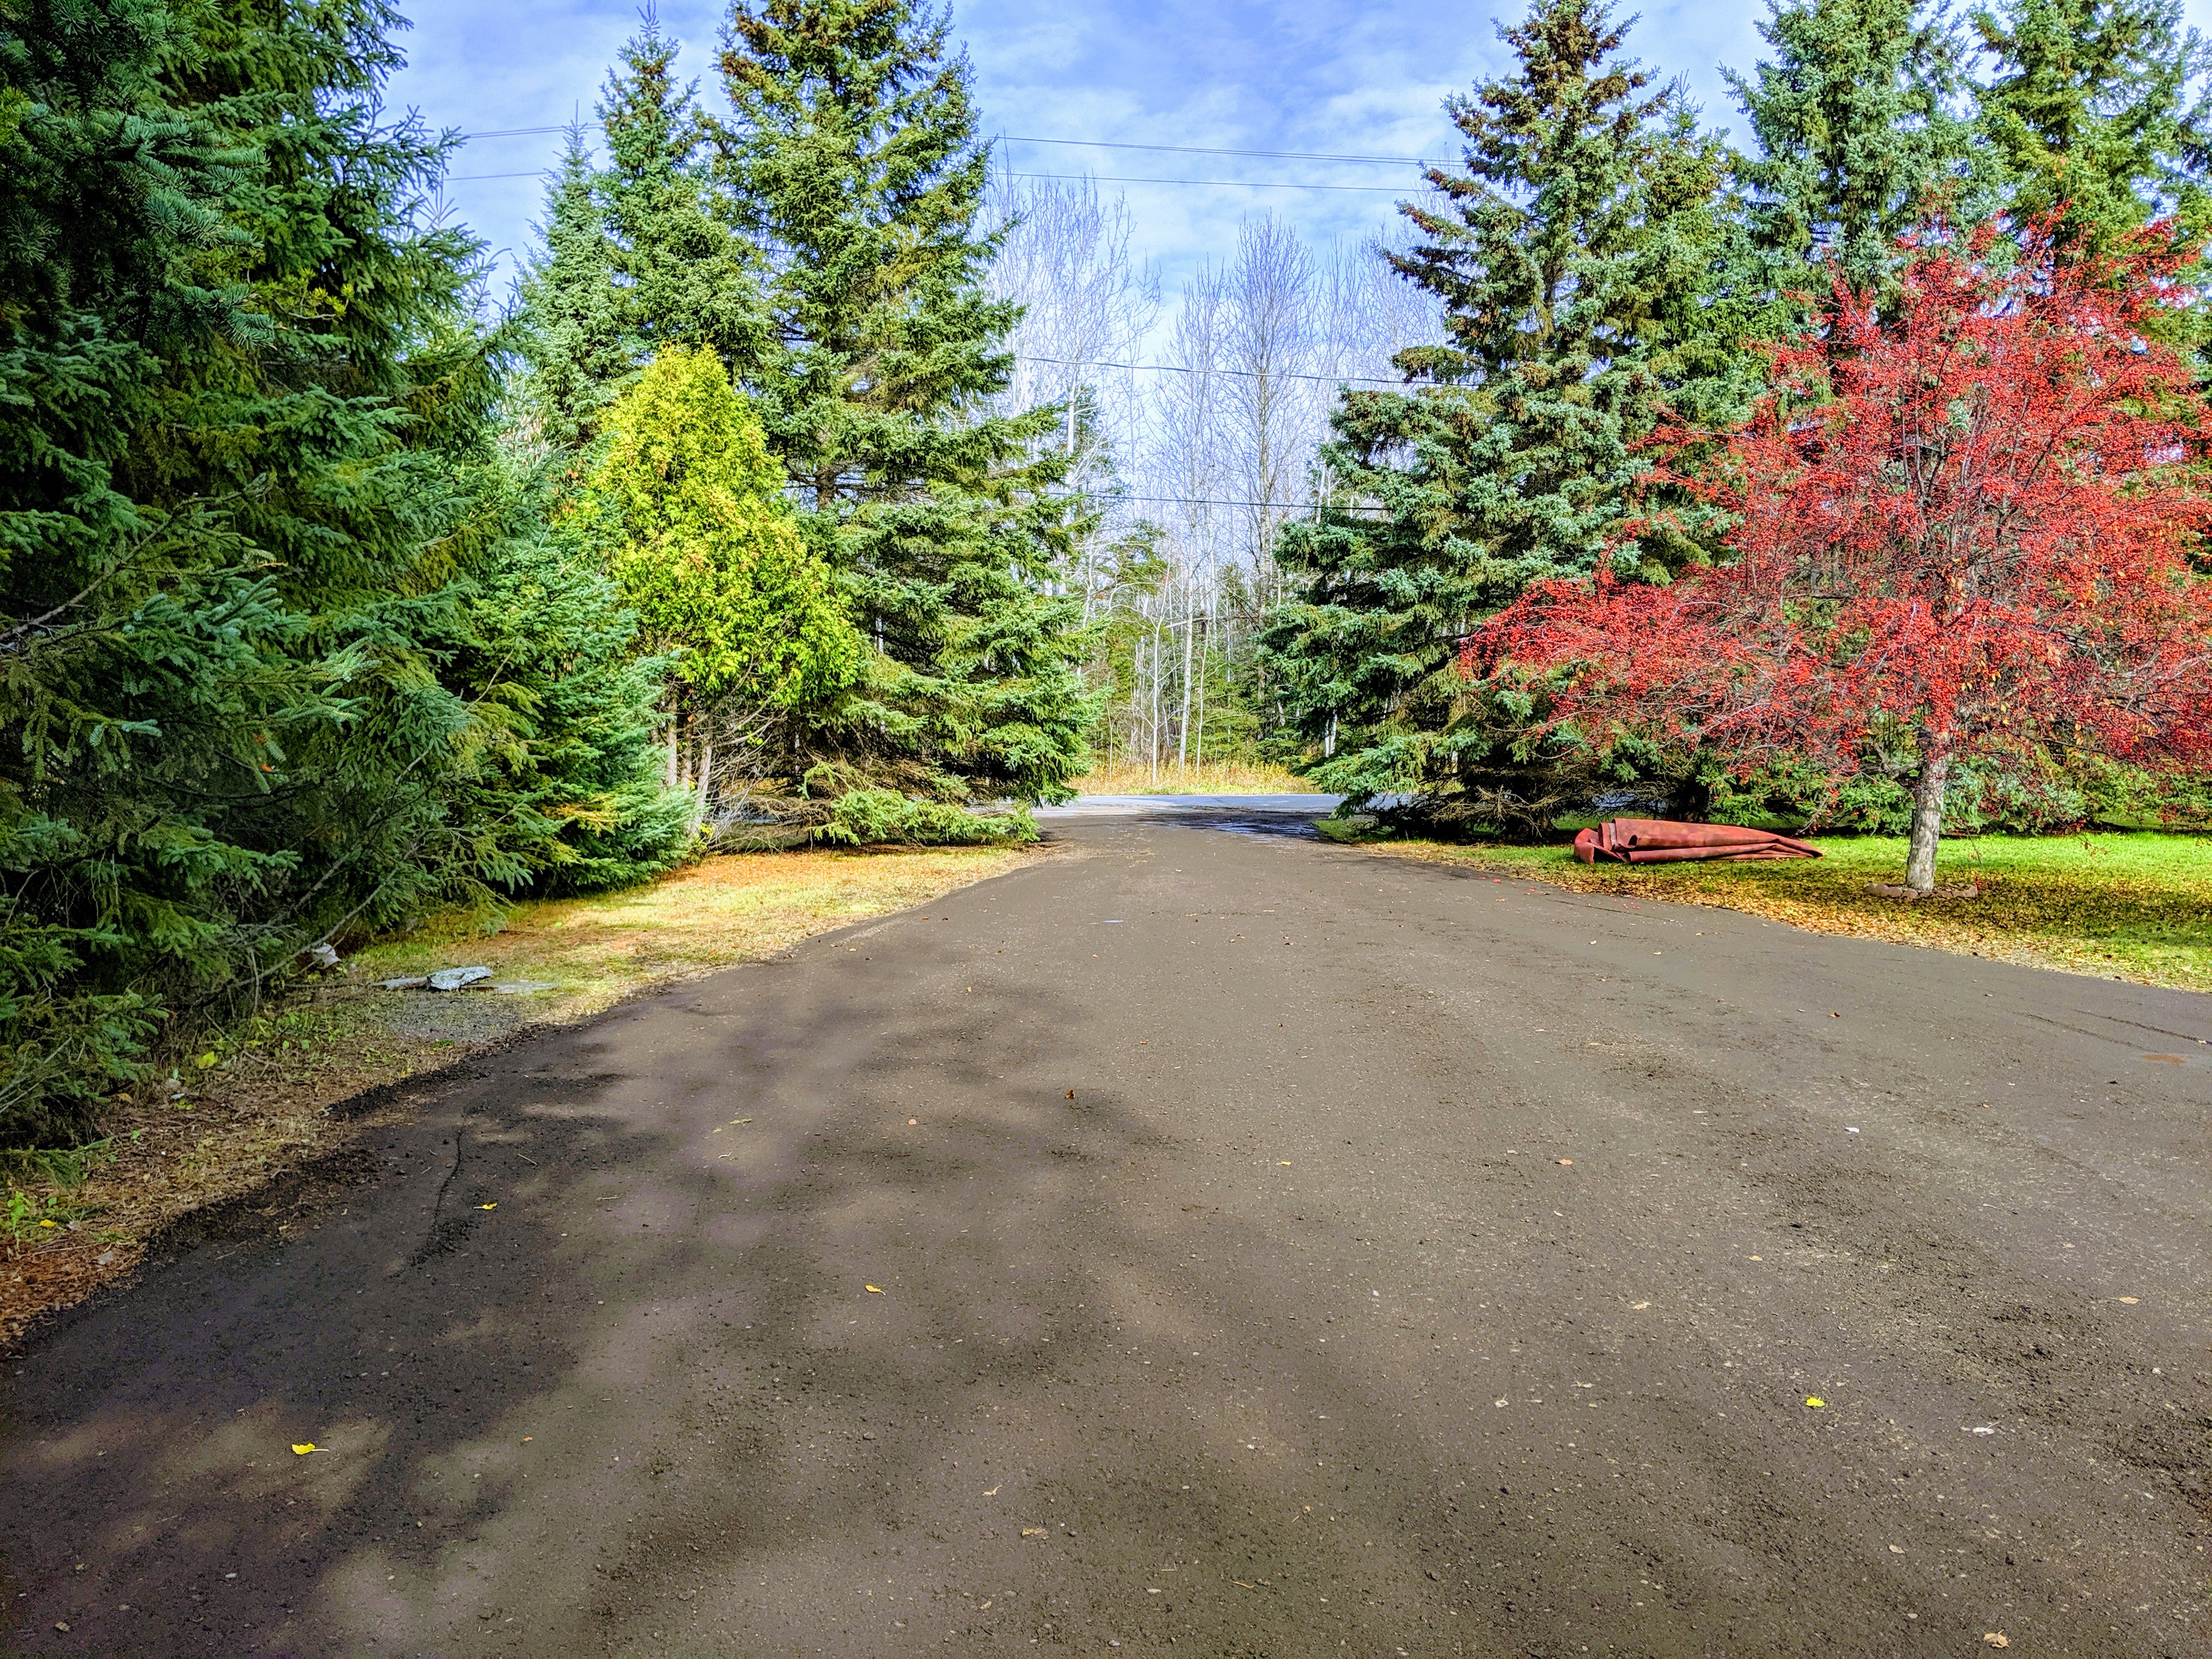 Driveway Resurfaced with RAP (Recycled Asphalt Product)